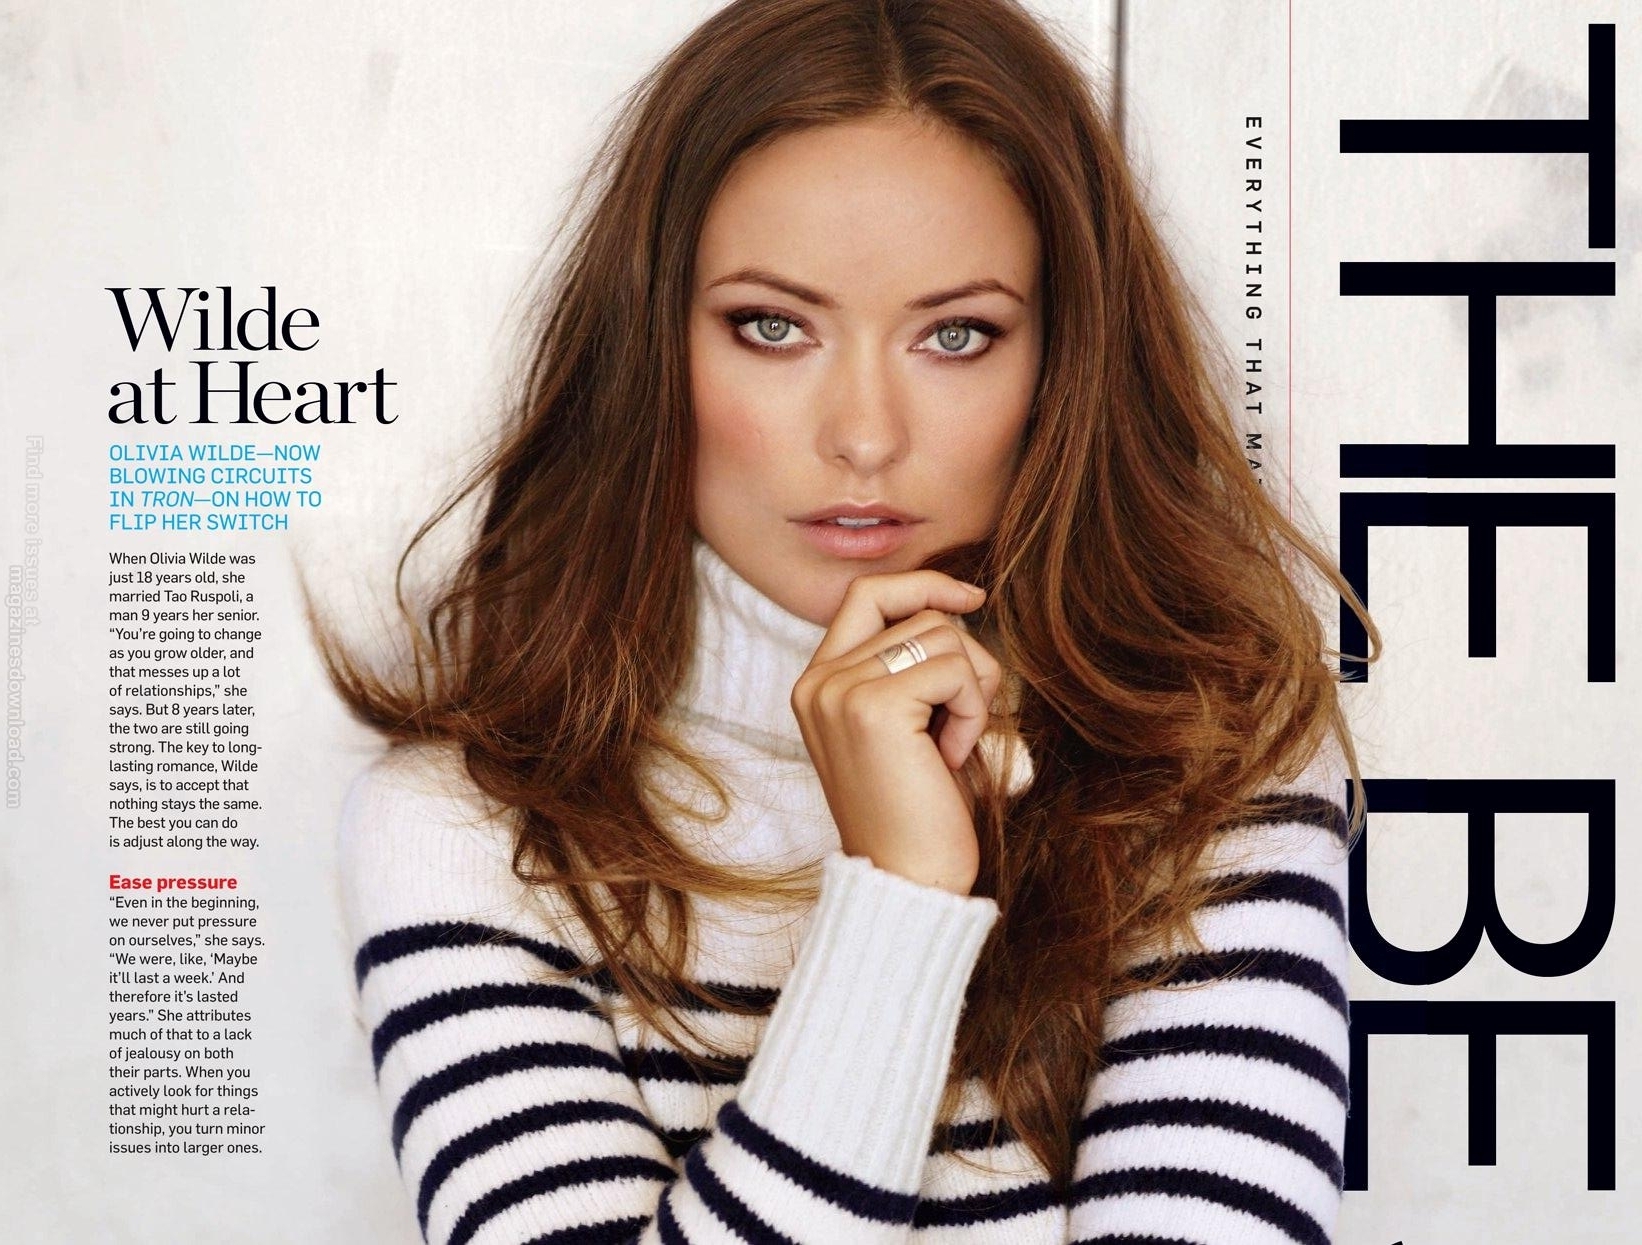 Photo of Olivia Wilde in January/February 2011 issue of "Men...